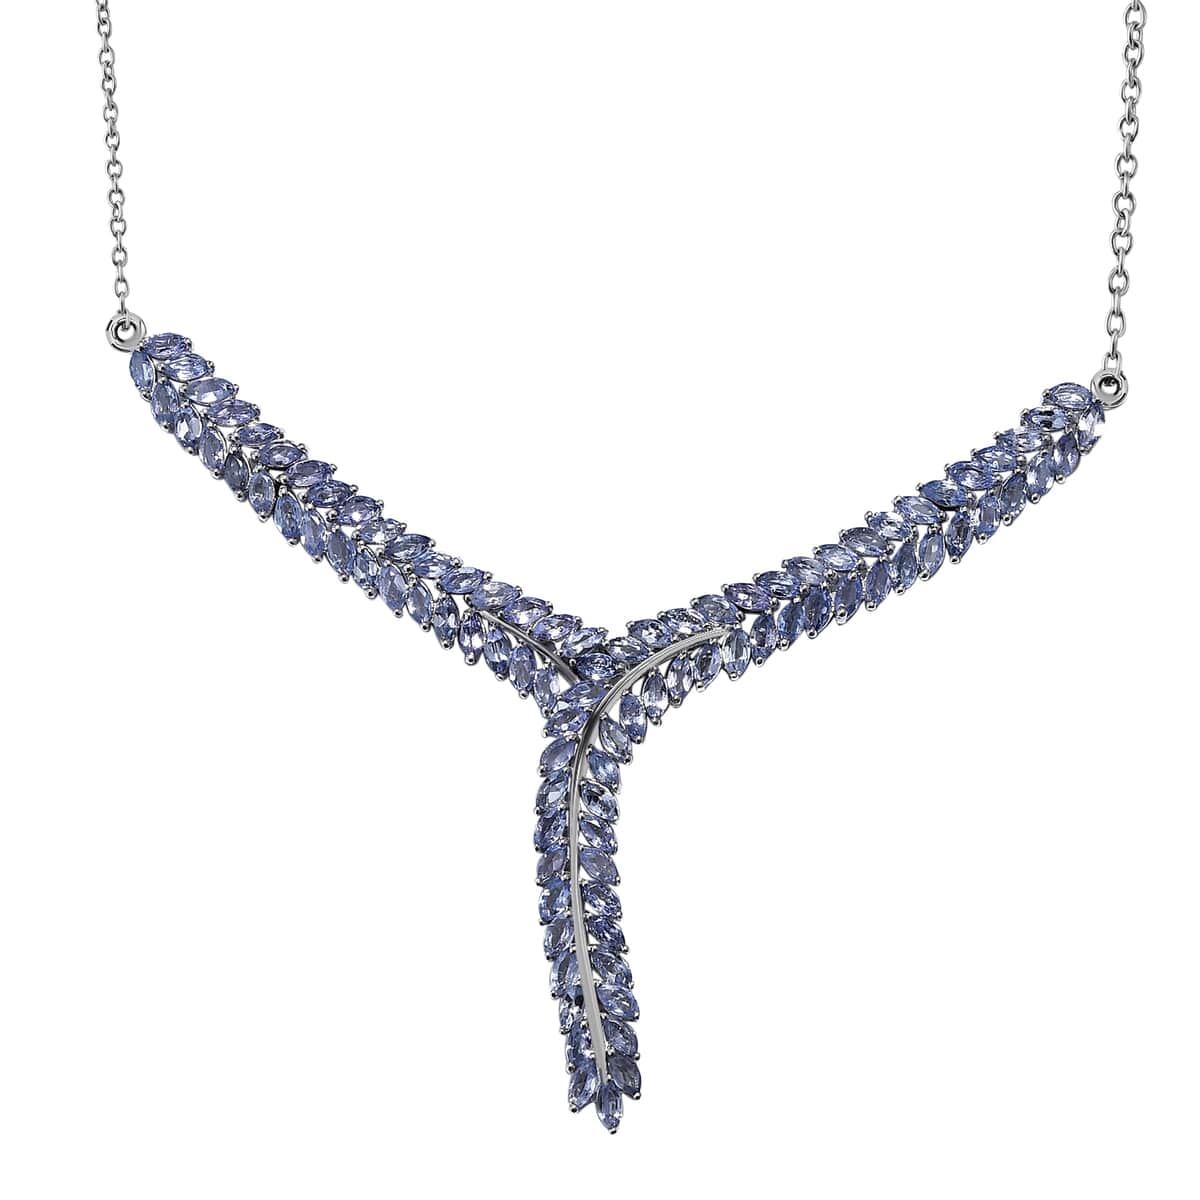 Karis Tanzanite Y-Shaped Necklace, 18 Inch Necklace in Platinum Bond, Tanzanite Jewelry, Gifts For Her 7.25 ctw image number 0